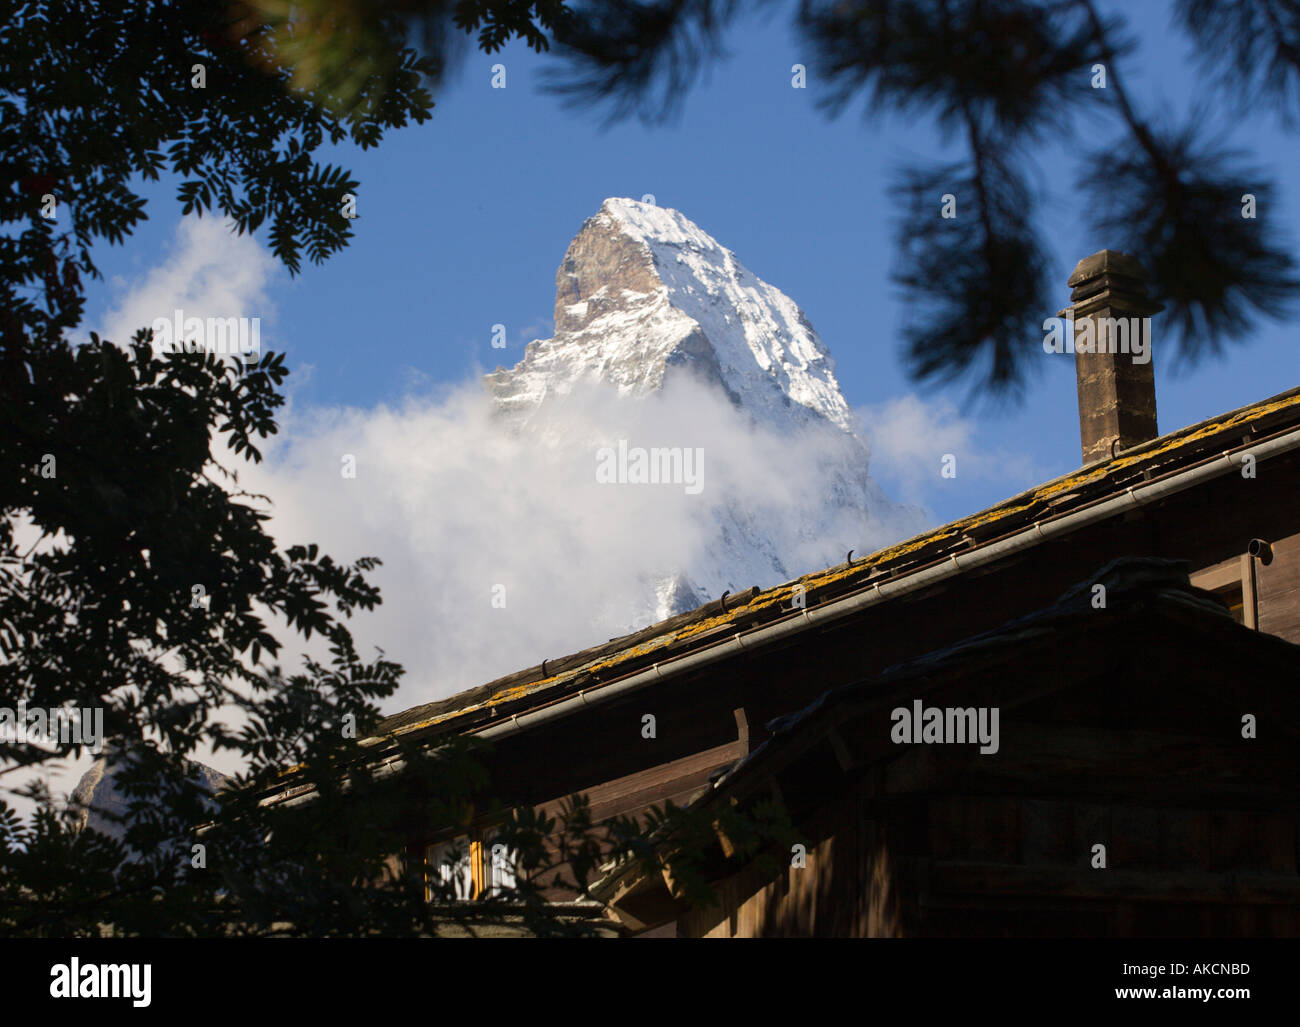 Peak of Matterhorn mountain framed by fir tree branches and chalet roof with chimney viewed from Zermatt Valais Switzerland Stock Photo